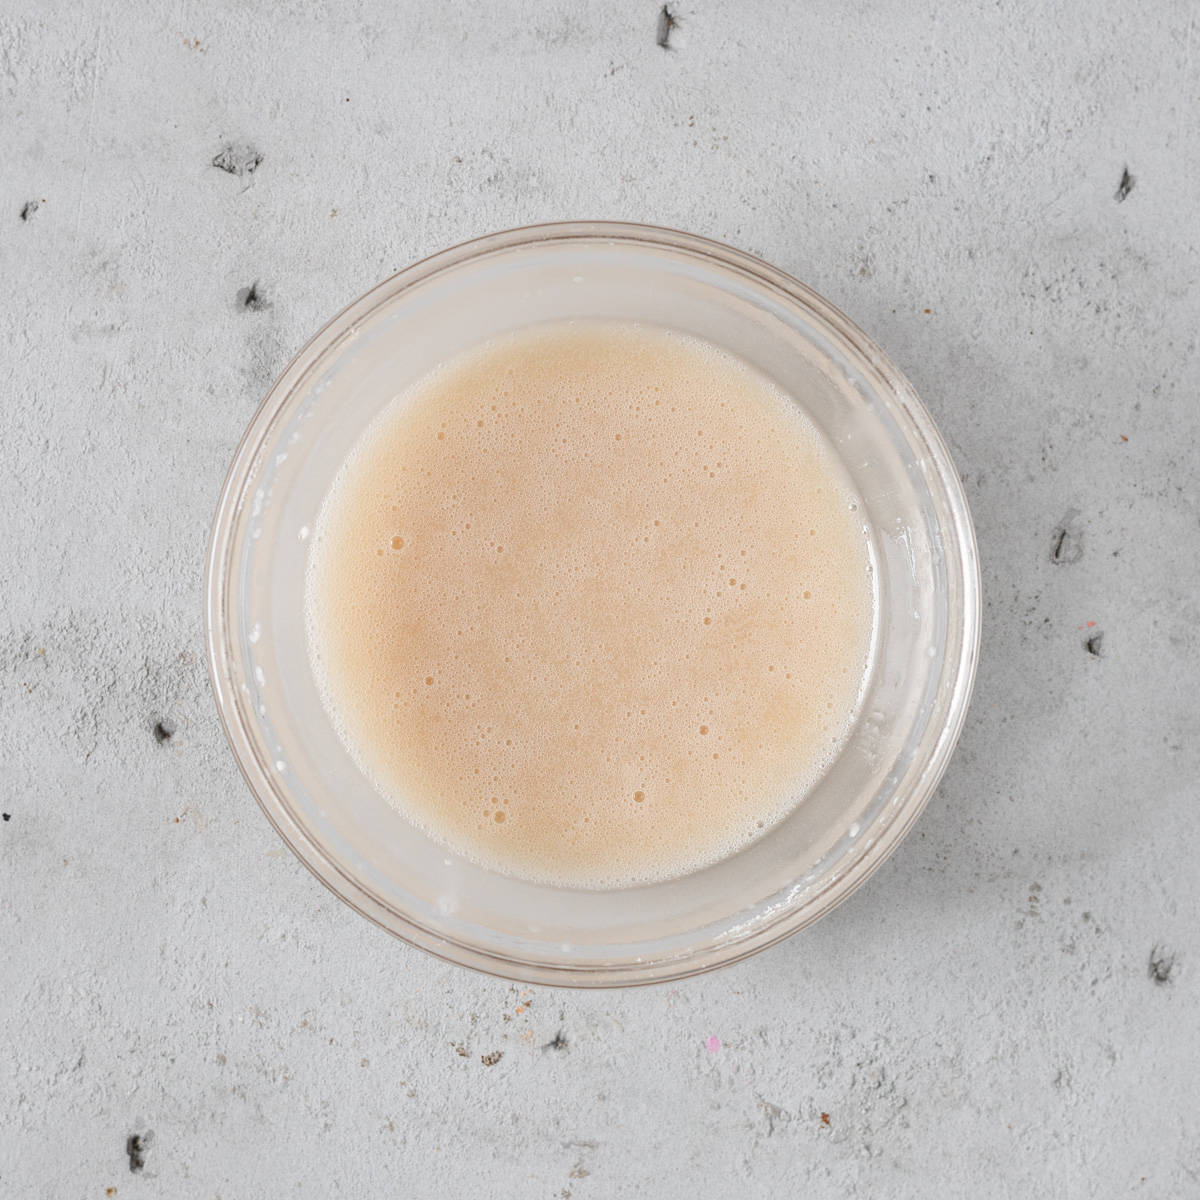 the dipping sauce in a glass bowl on a grey background.